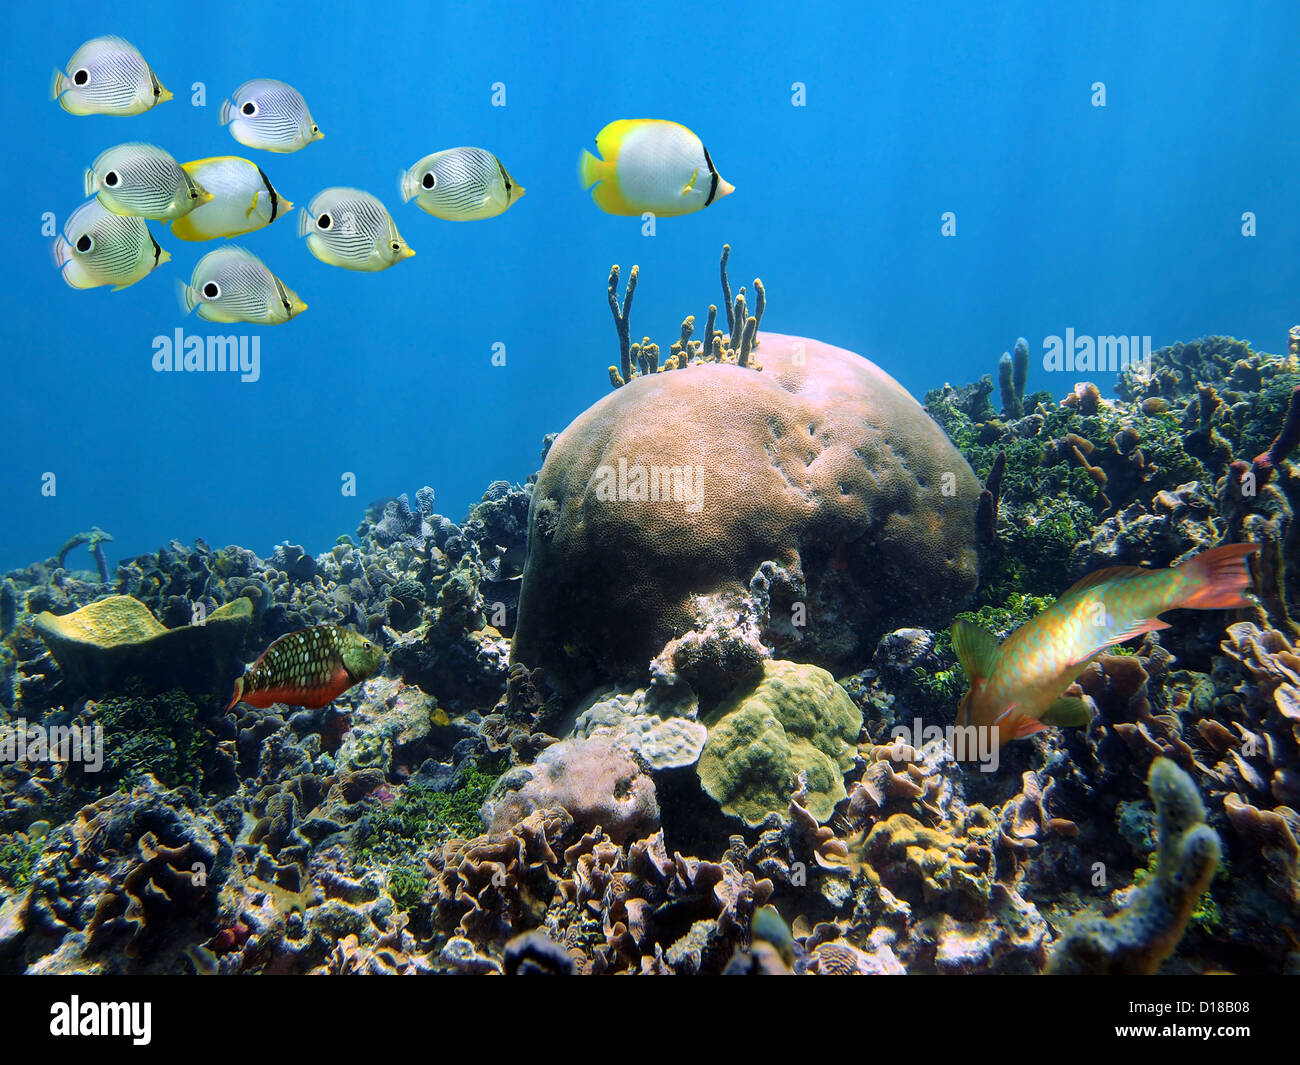 Shoal of butterflyfish above a coral reef, Caribbean sea Stock Photo